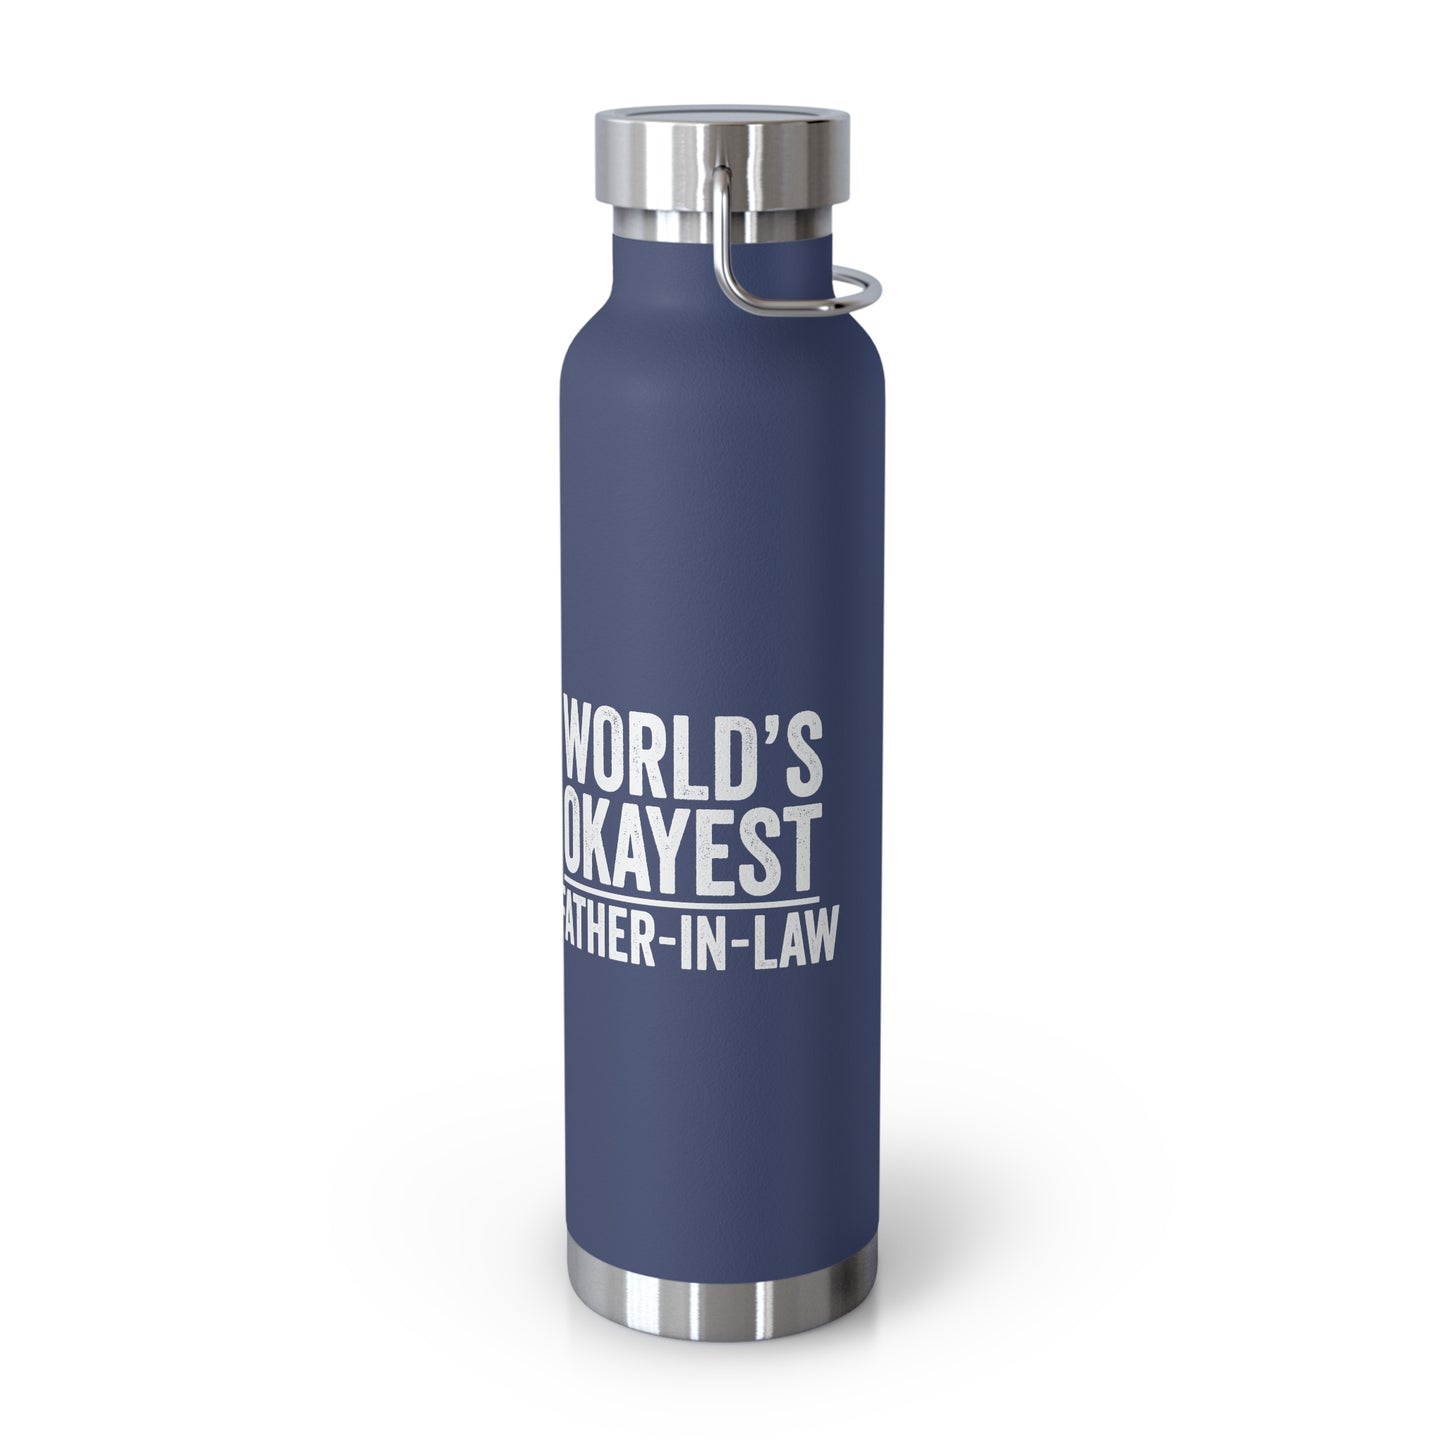 World's Okayest Father-In-Law Copper Vacuum Insulated Bottle, 22oz